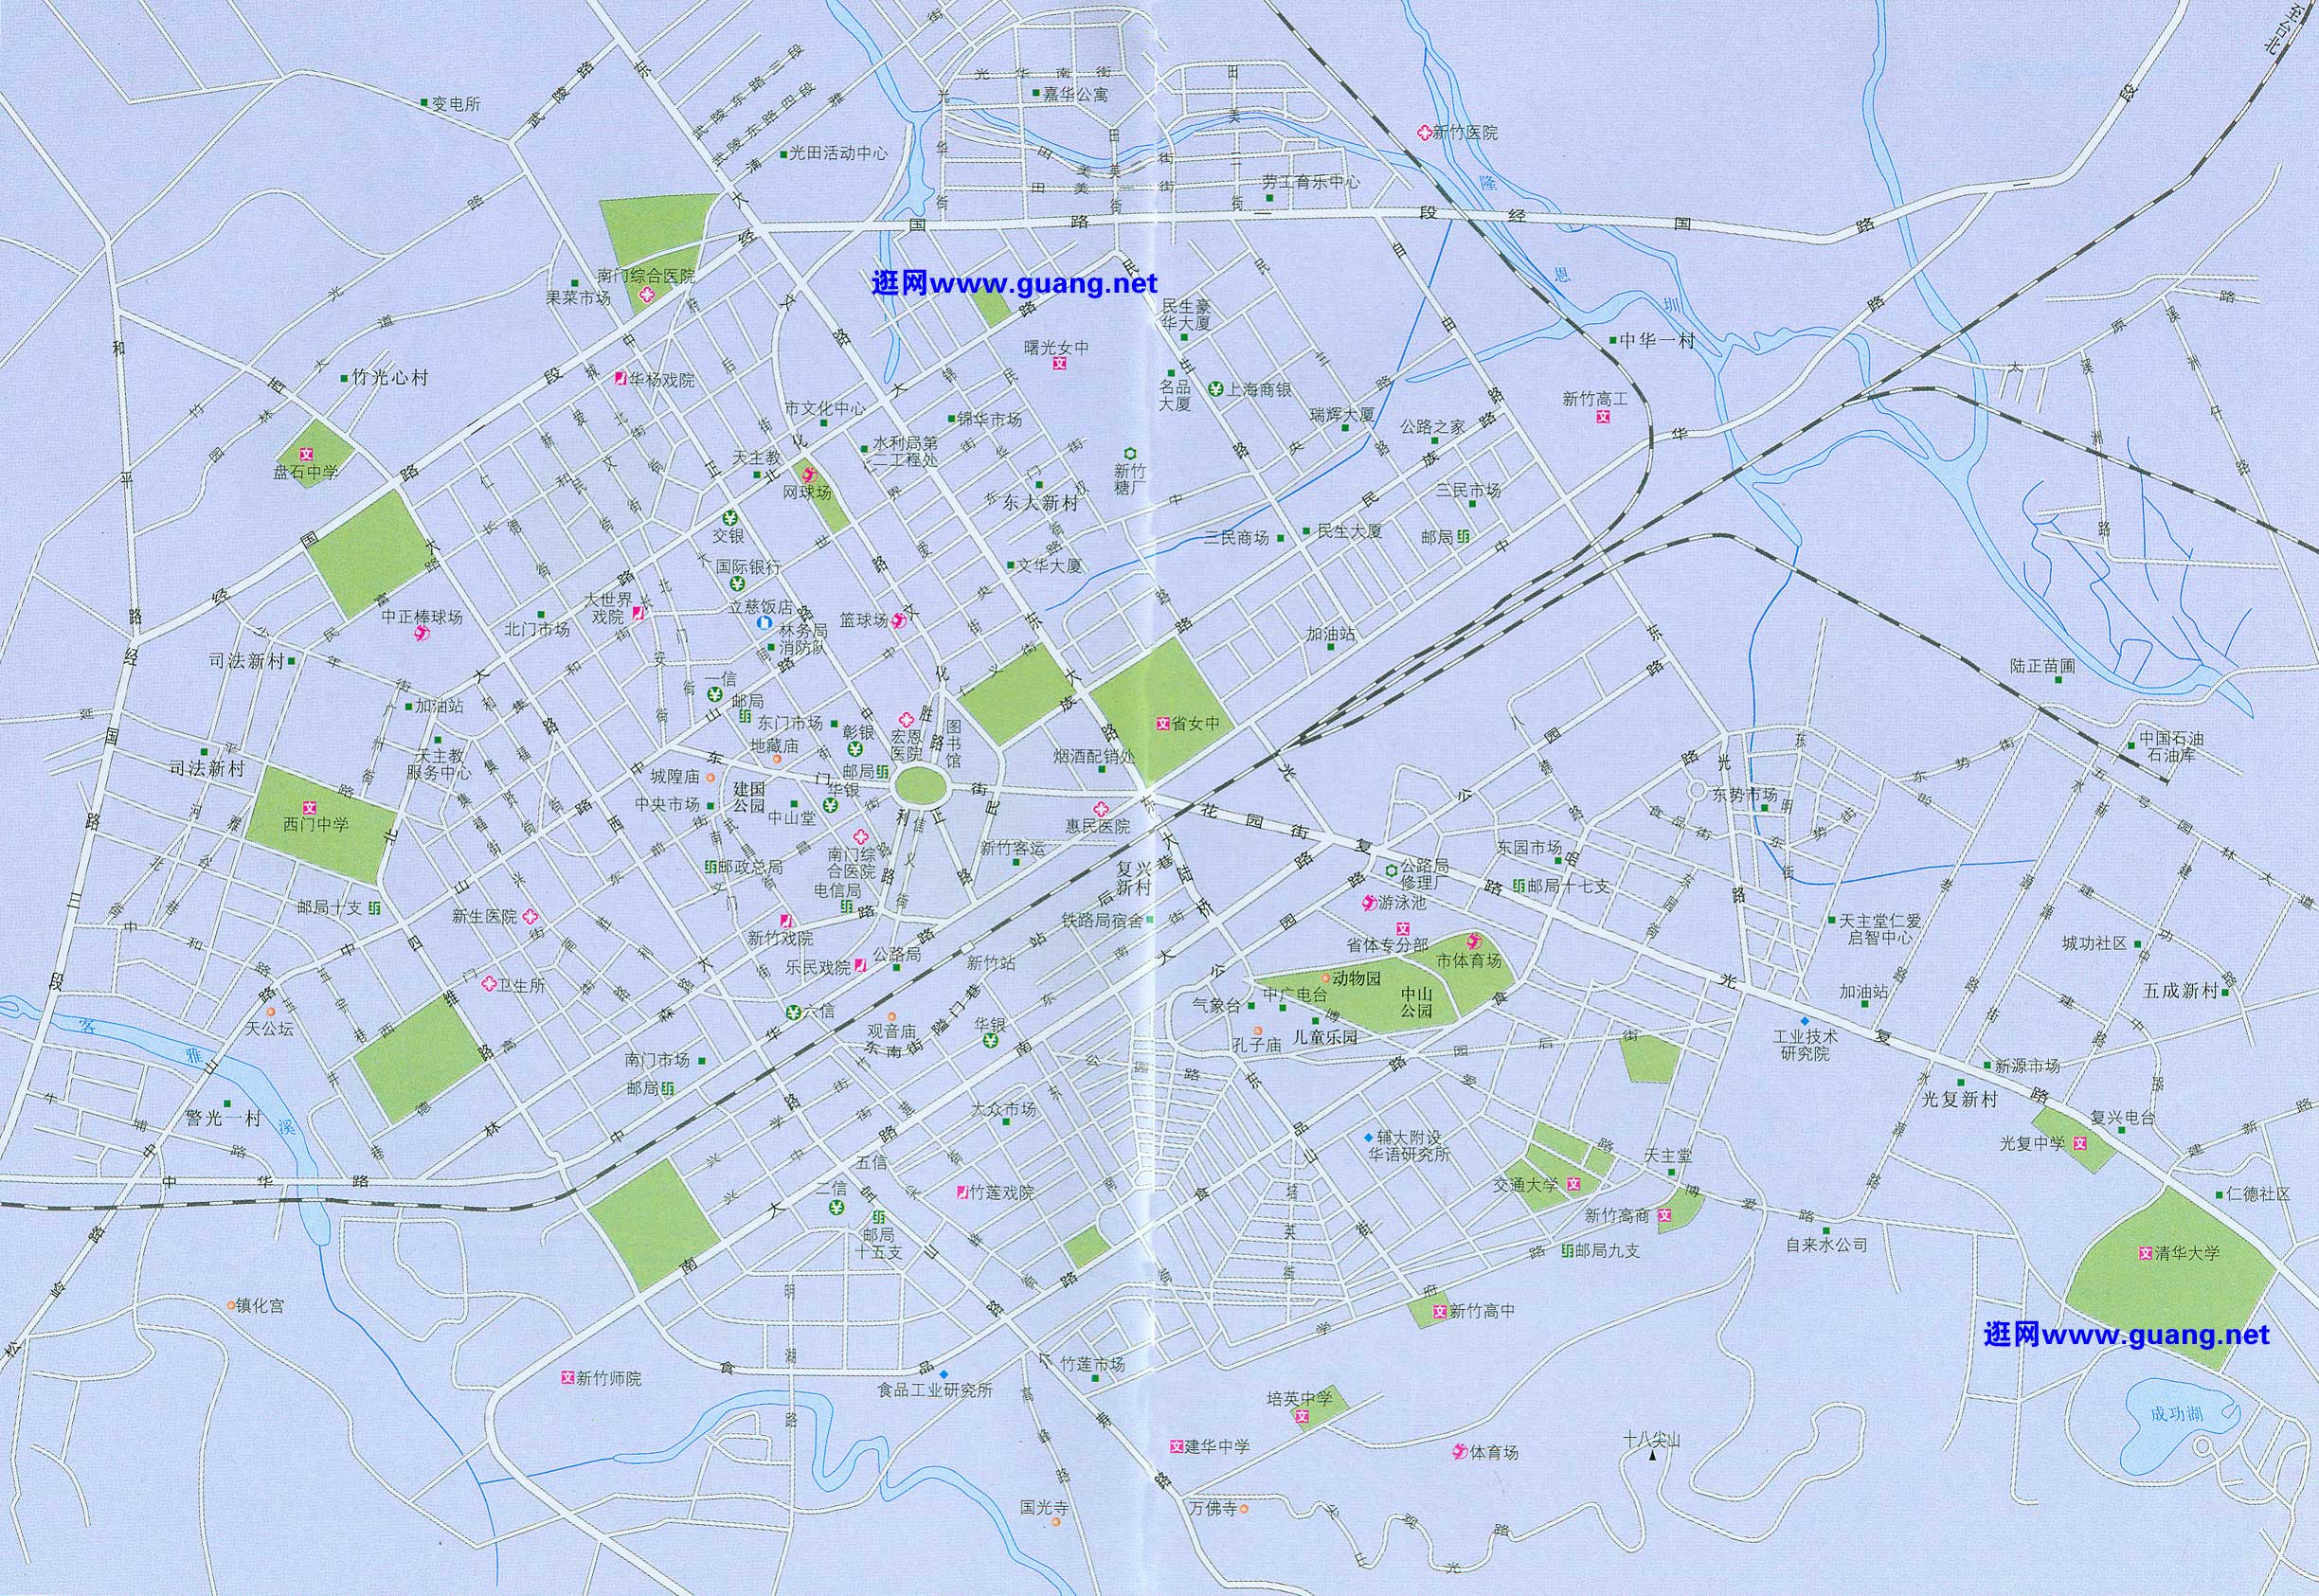 Click to enlarge - Map of Hsinchu, Taiwan